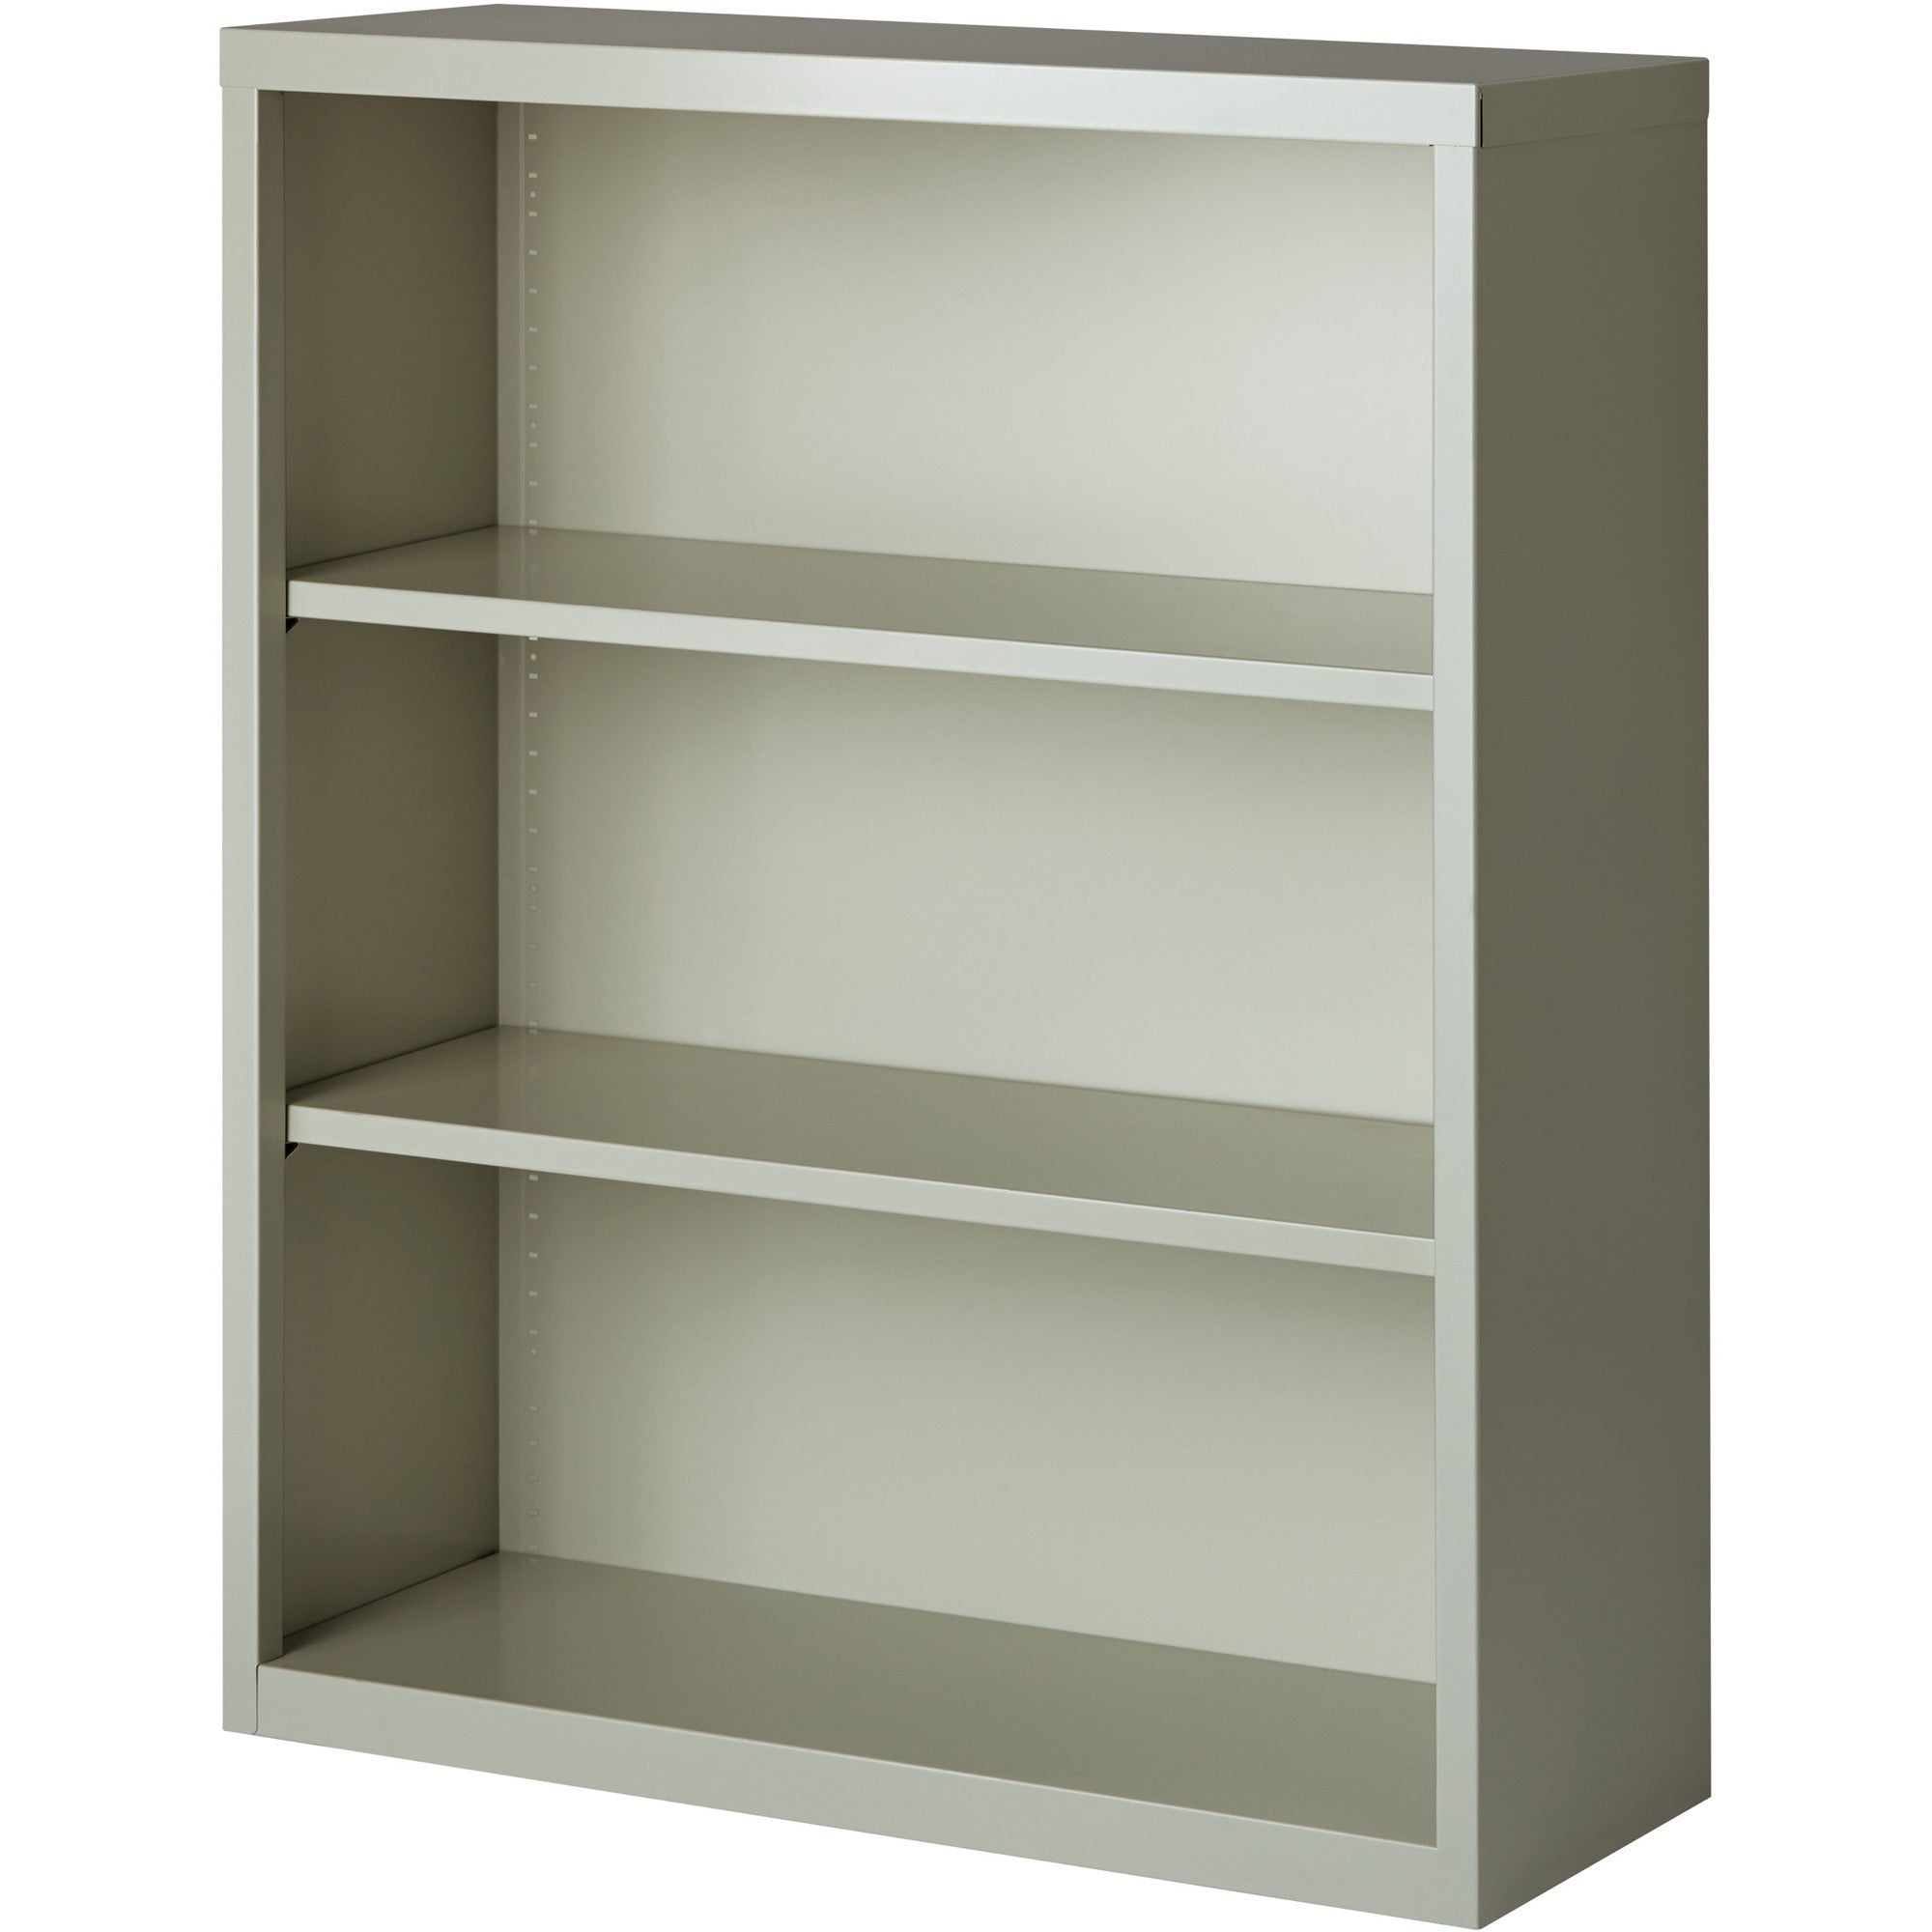 Lorell Fortress Series Bookcase - 34.5" x 13" x 42" - 3 x Shelf(ves) - Light Gray - Powder Coated - Steel - Recycled - 